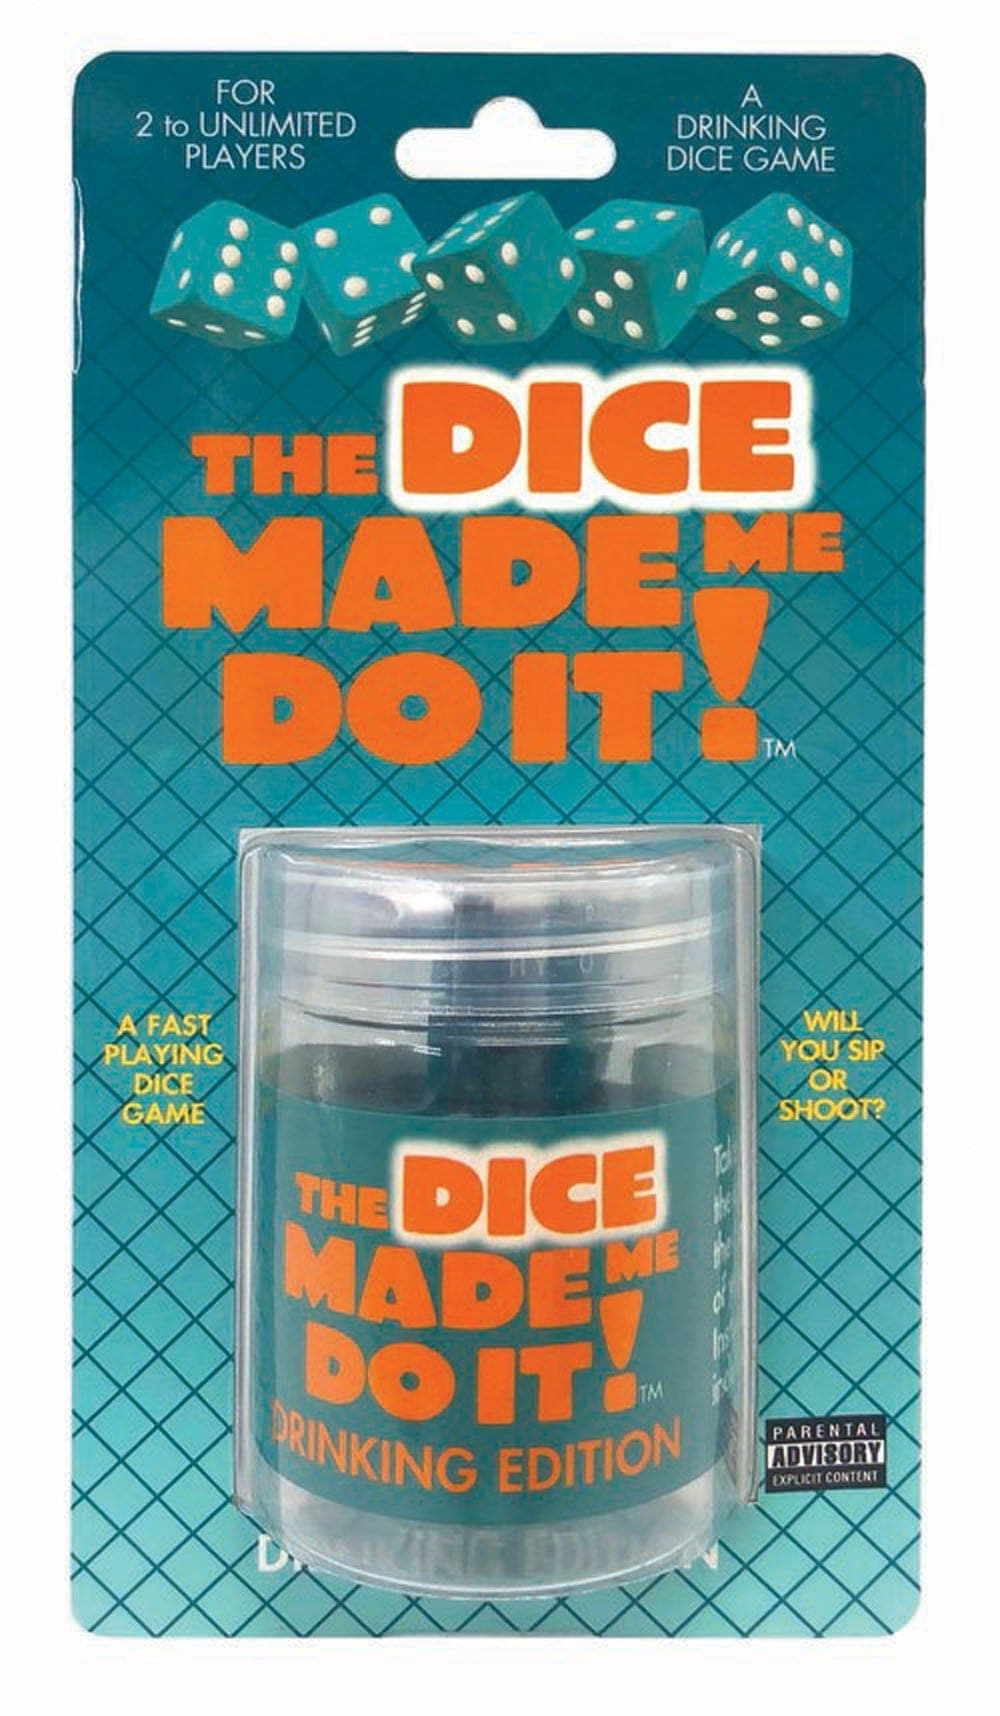 the dice made me do it drinking edition